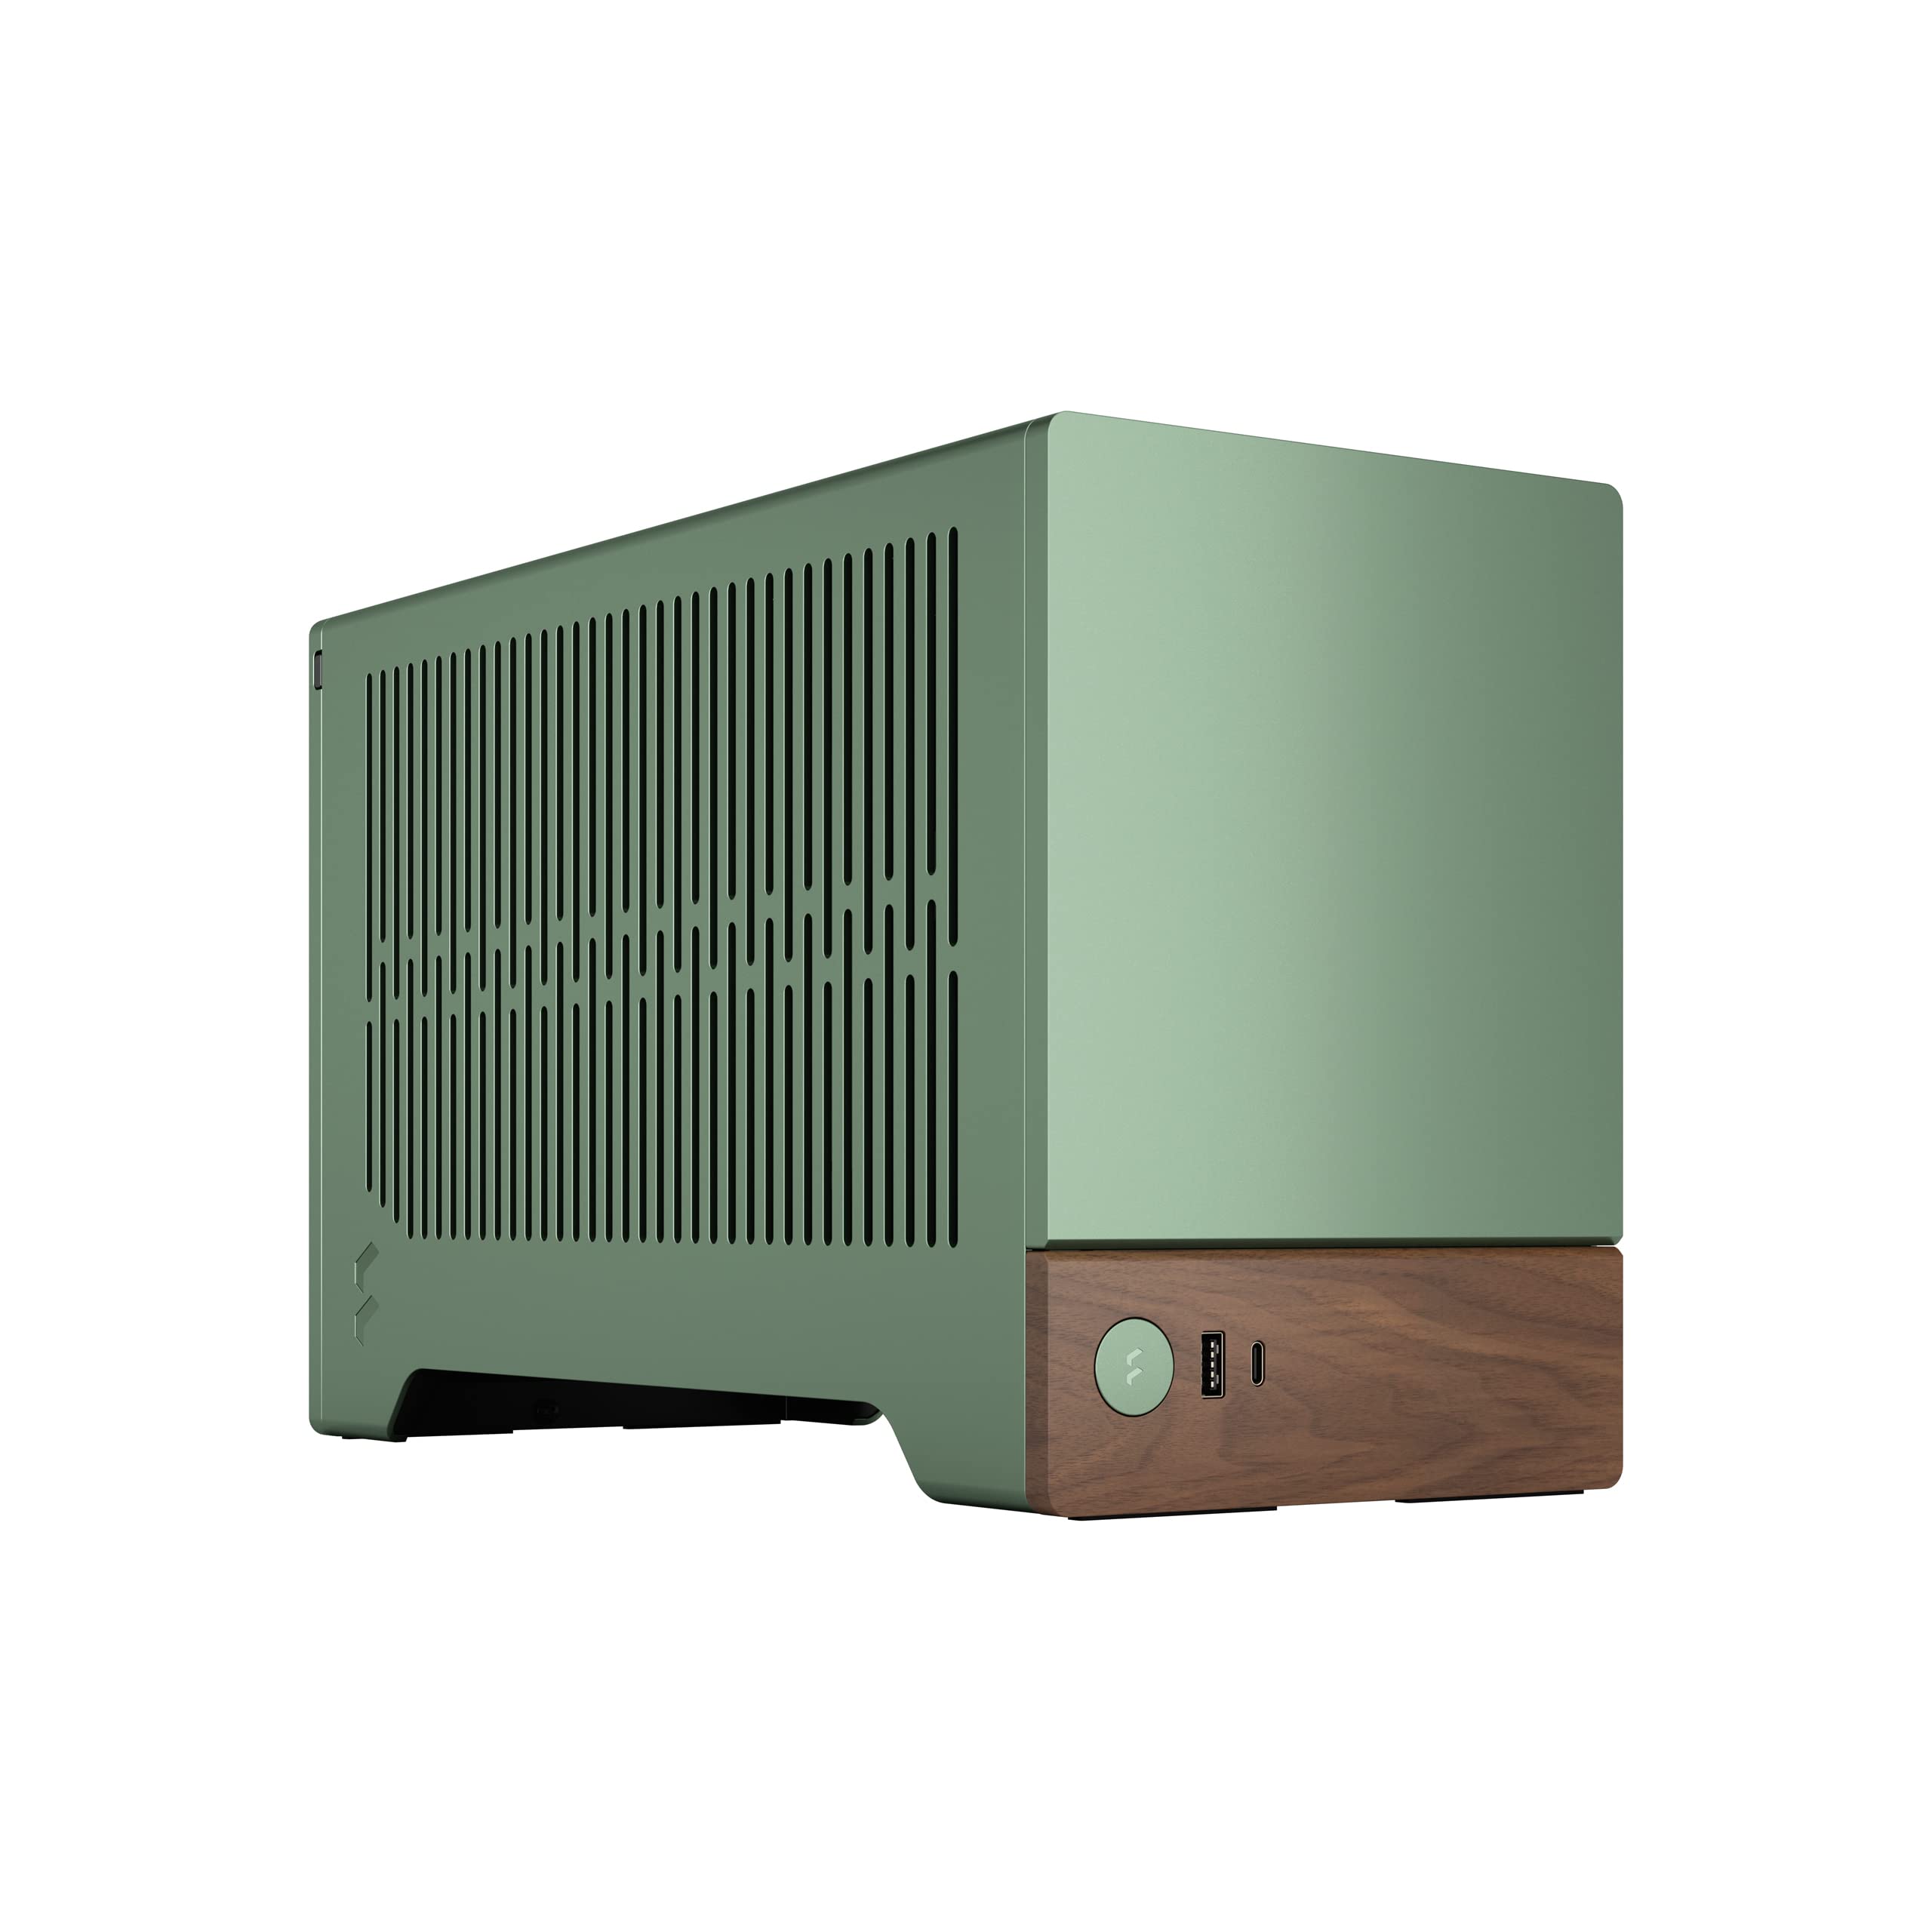 Fractal Design Terra Jade - Wood Walnut Front Panel - Small Form Factor - Mini ITX Gaming case – PCIe 4.0 Riser Cable – USB Type-C - Anodized Aluminum Panels